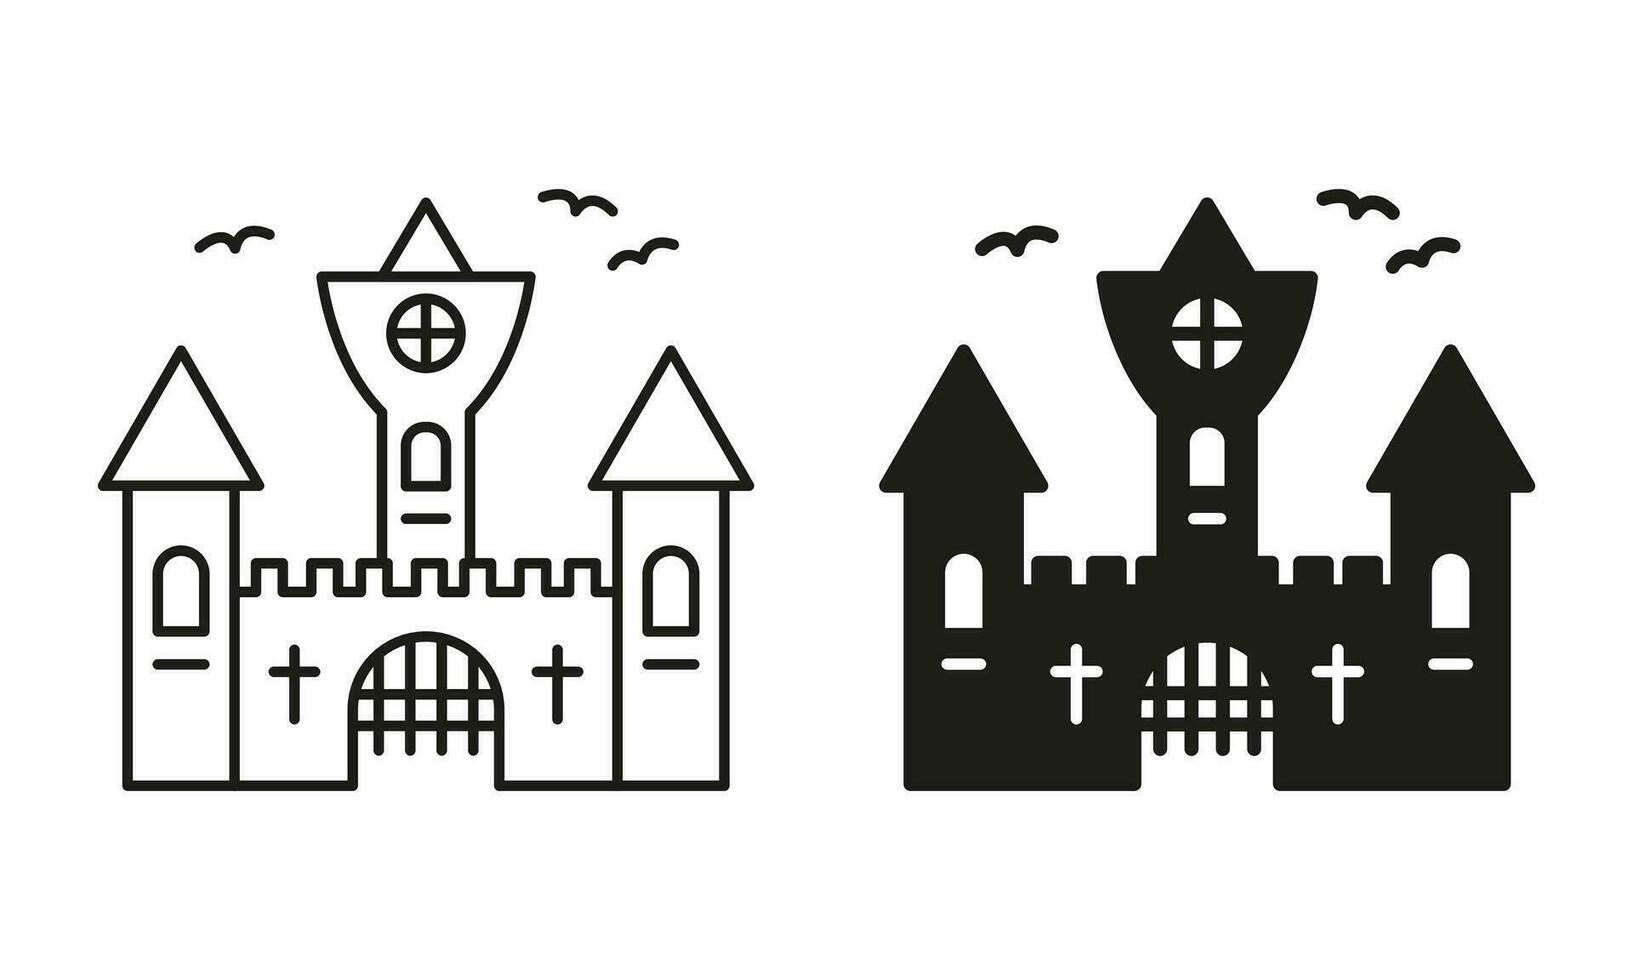 Halloween Gothic Spooky Castle Pictogram Set. Vampire Dracula Scary Castle Line and Silhouette Black Icons. Dark Old Castle for Halloween Celebration Symbol Collection. Isolated Vector Illustration.